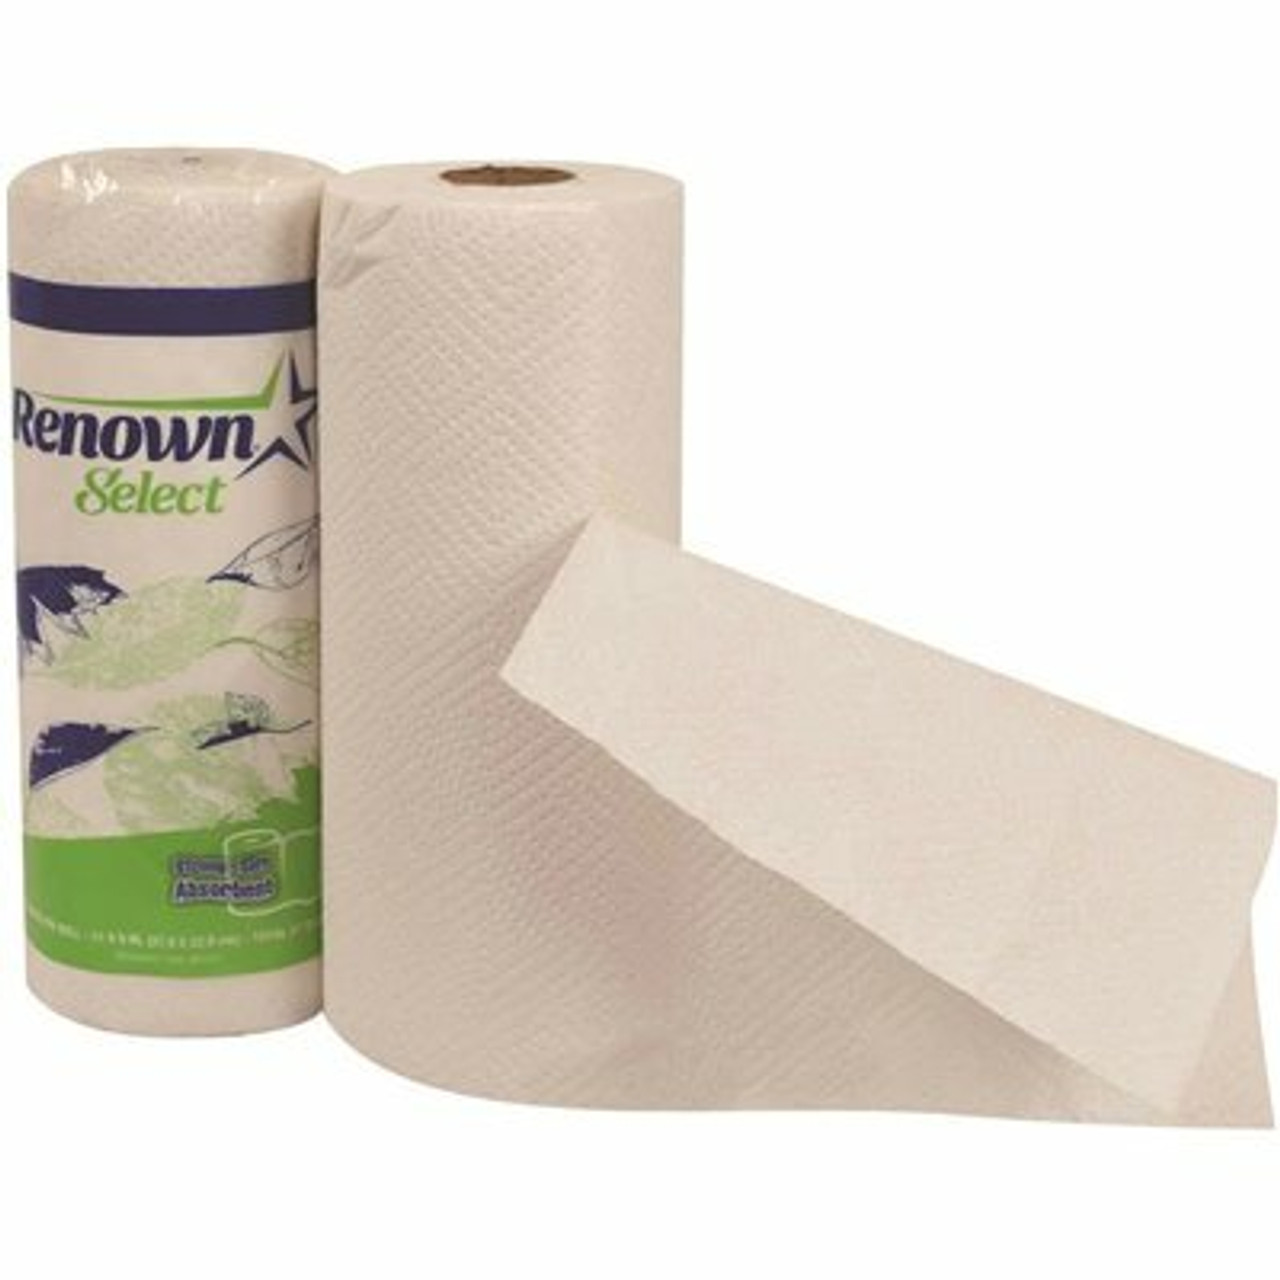 Renown White Perforated 2-Ply Paper Towel-Roll